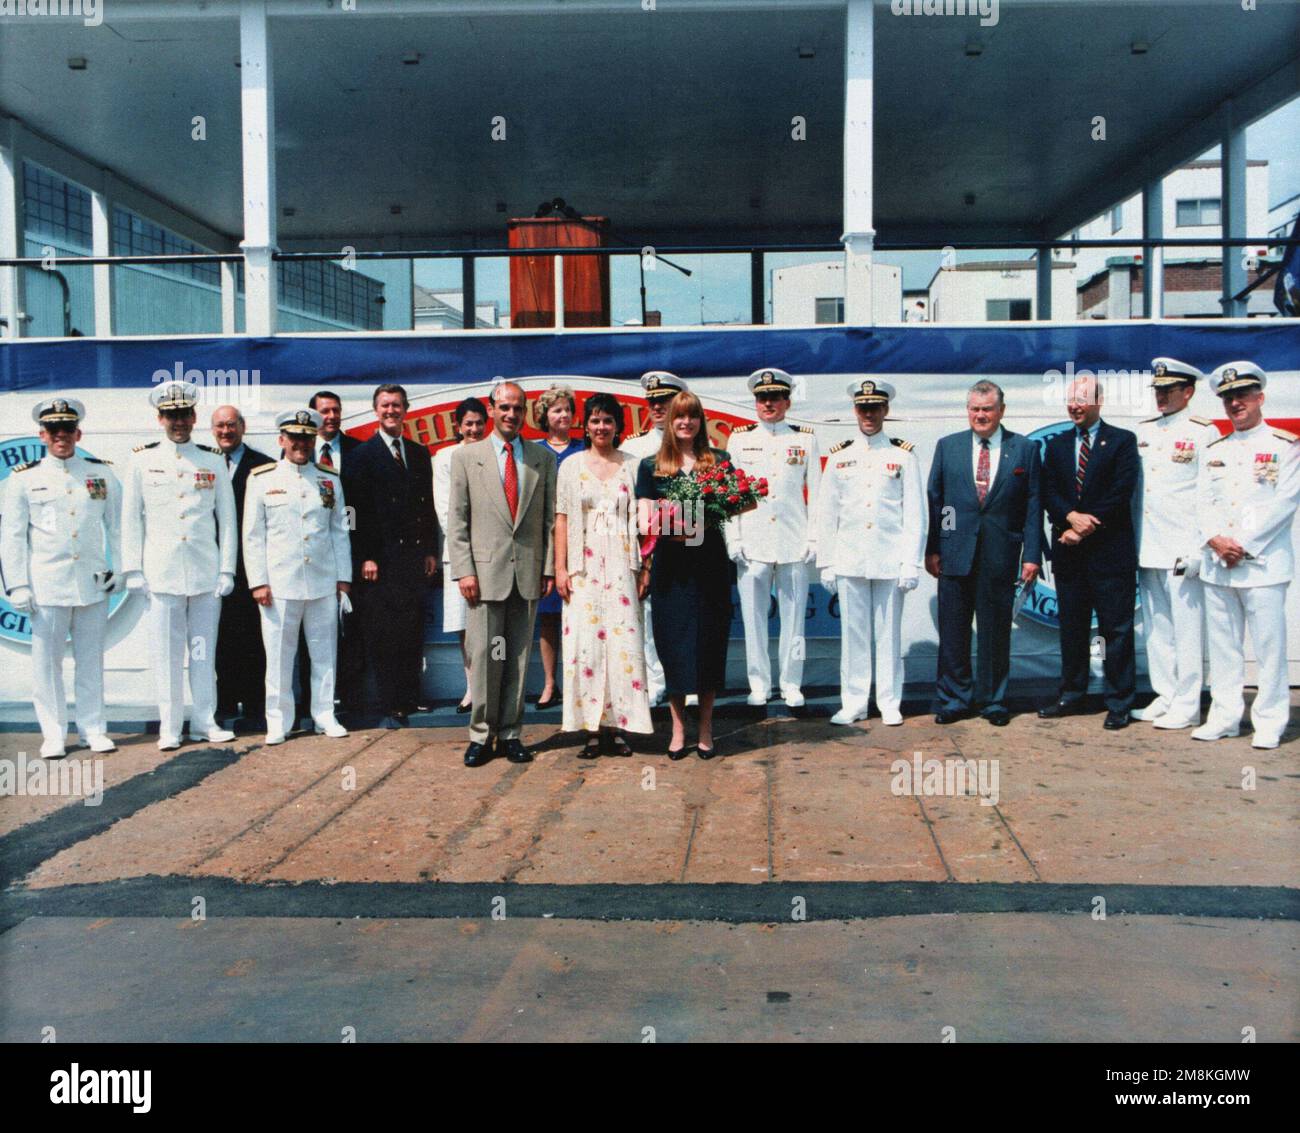 The official party for the christening and launch of the guided missile destroyer USS The Sullivans (DDG-68). Left to right, CDR. Roncolato, CDR. Ingram, Mr. Fitzgerald, RADM Retz, Mr. Taylor, Hon. William Cohen, Hon. Olympia J. Snowe, Hon. John Baldacci, Mrs. Mustin, Heather S. Hudson, CAPT. Rubel, Kelly Ann Sullivan Loughren, CAPT. Staples, CDR. Russo, RADM Meyer, Hon. James B. Longley, Jr., RADM George A. Huchting, and VADM Philip M. Quast. Base: Bath State: Maine (ME) Country: United States Of America (USA) Stock Photo